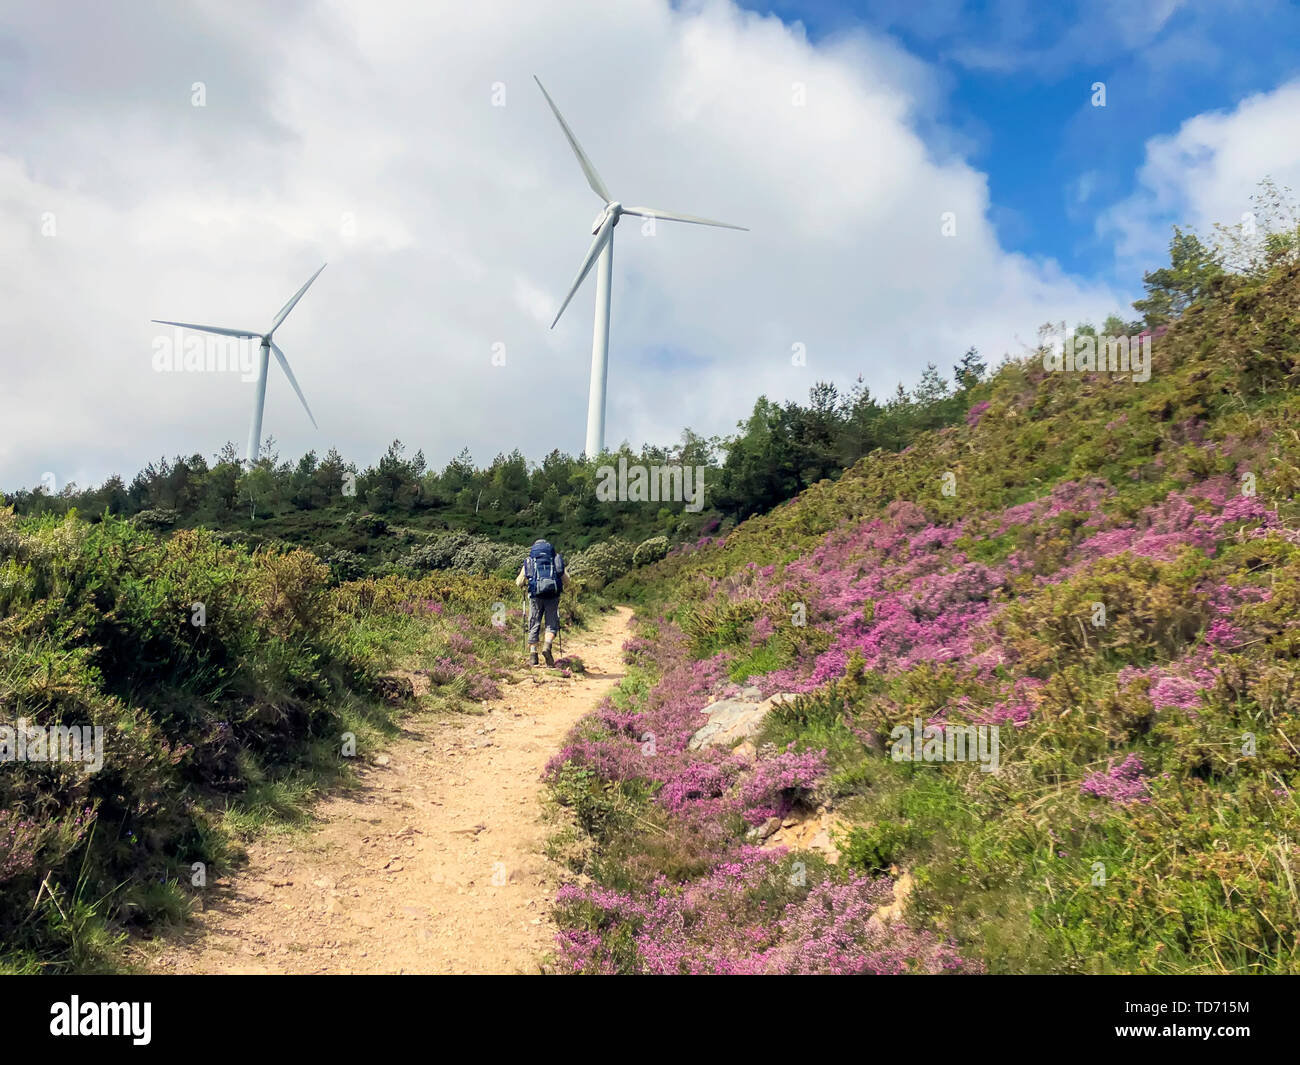 Traveler with backpack and trekking sticks, hiking poles climbs up a ground road up to hill with wind generators are visible. Active and healthy Stock Photo